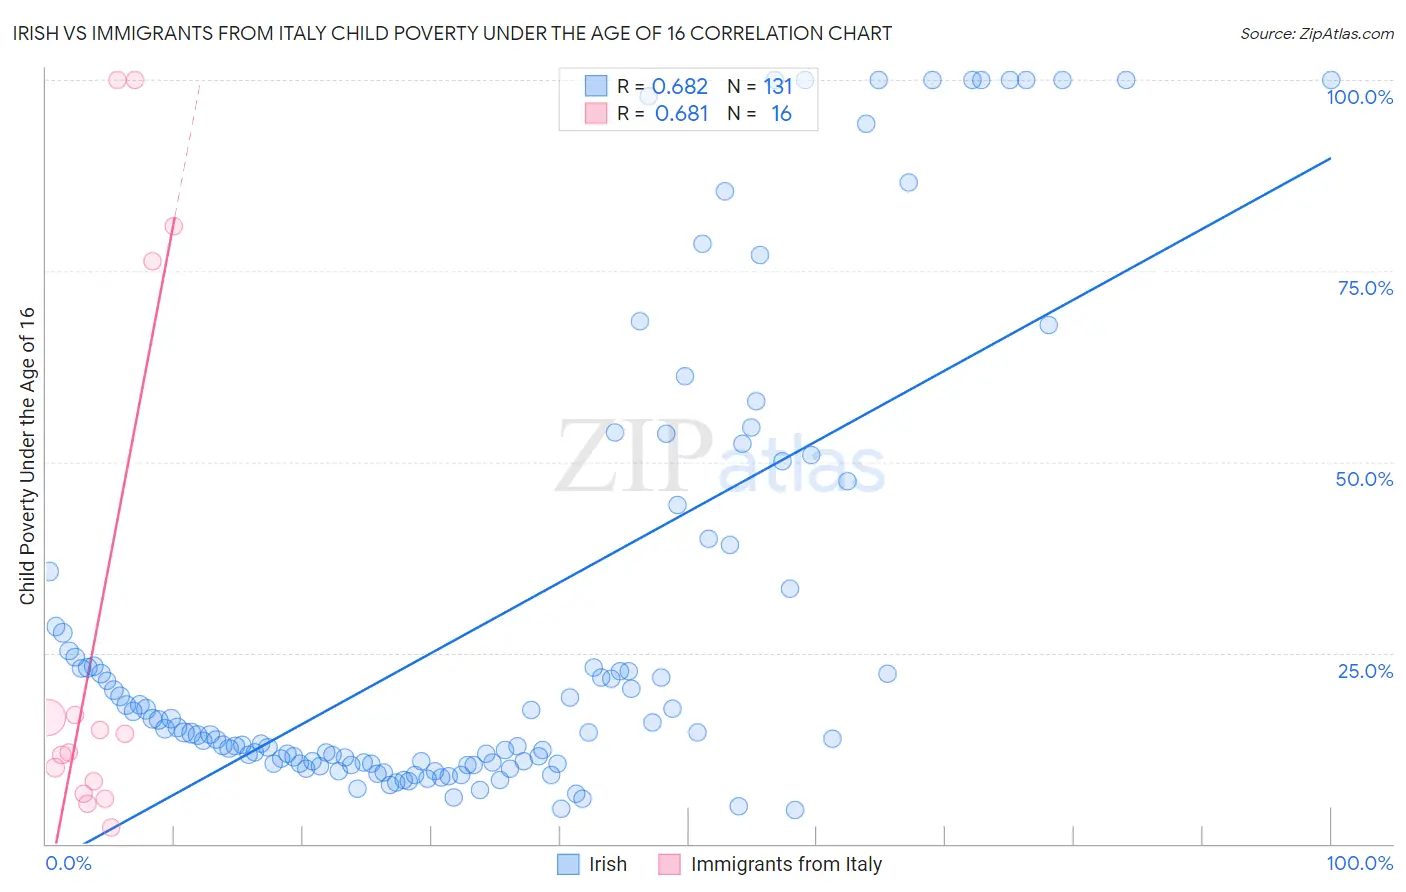 Irish vs Immigrants from Italy Child Poverty Under the Age of 16